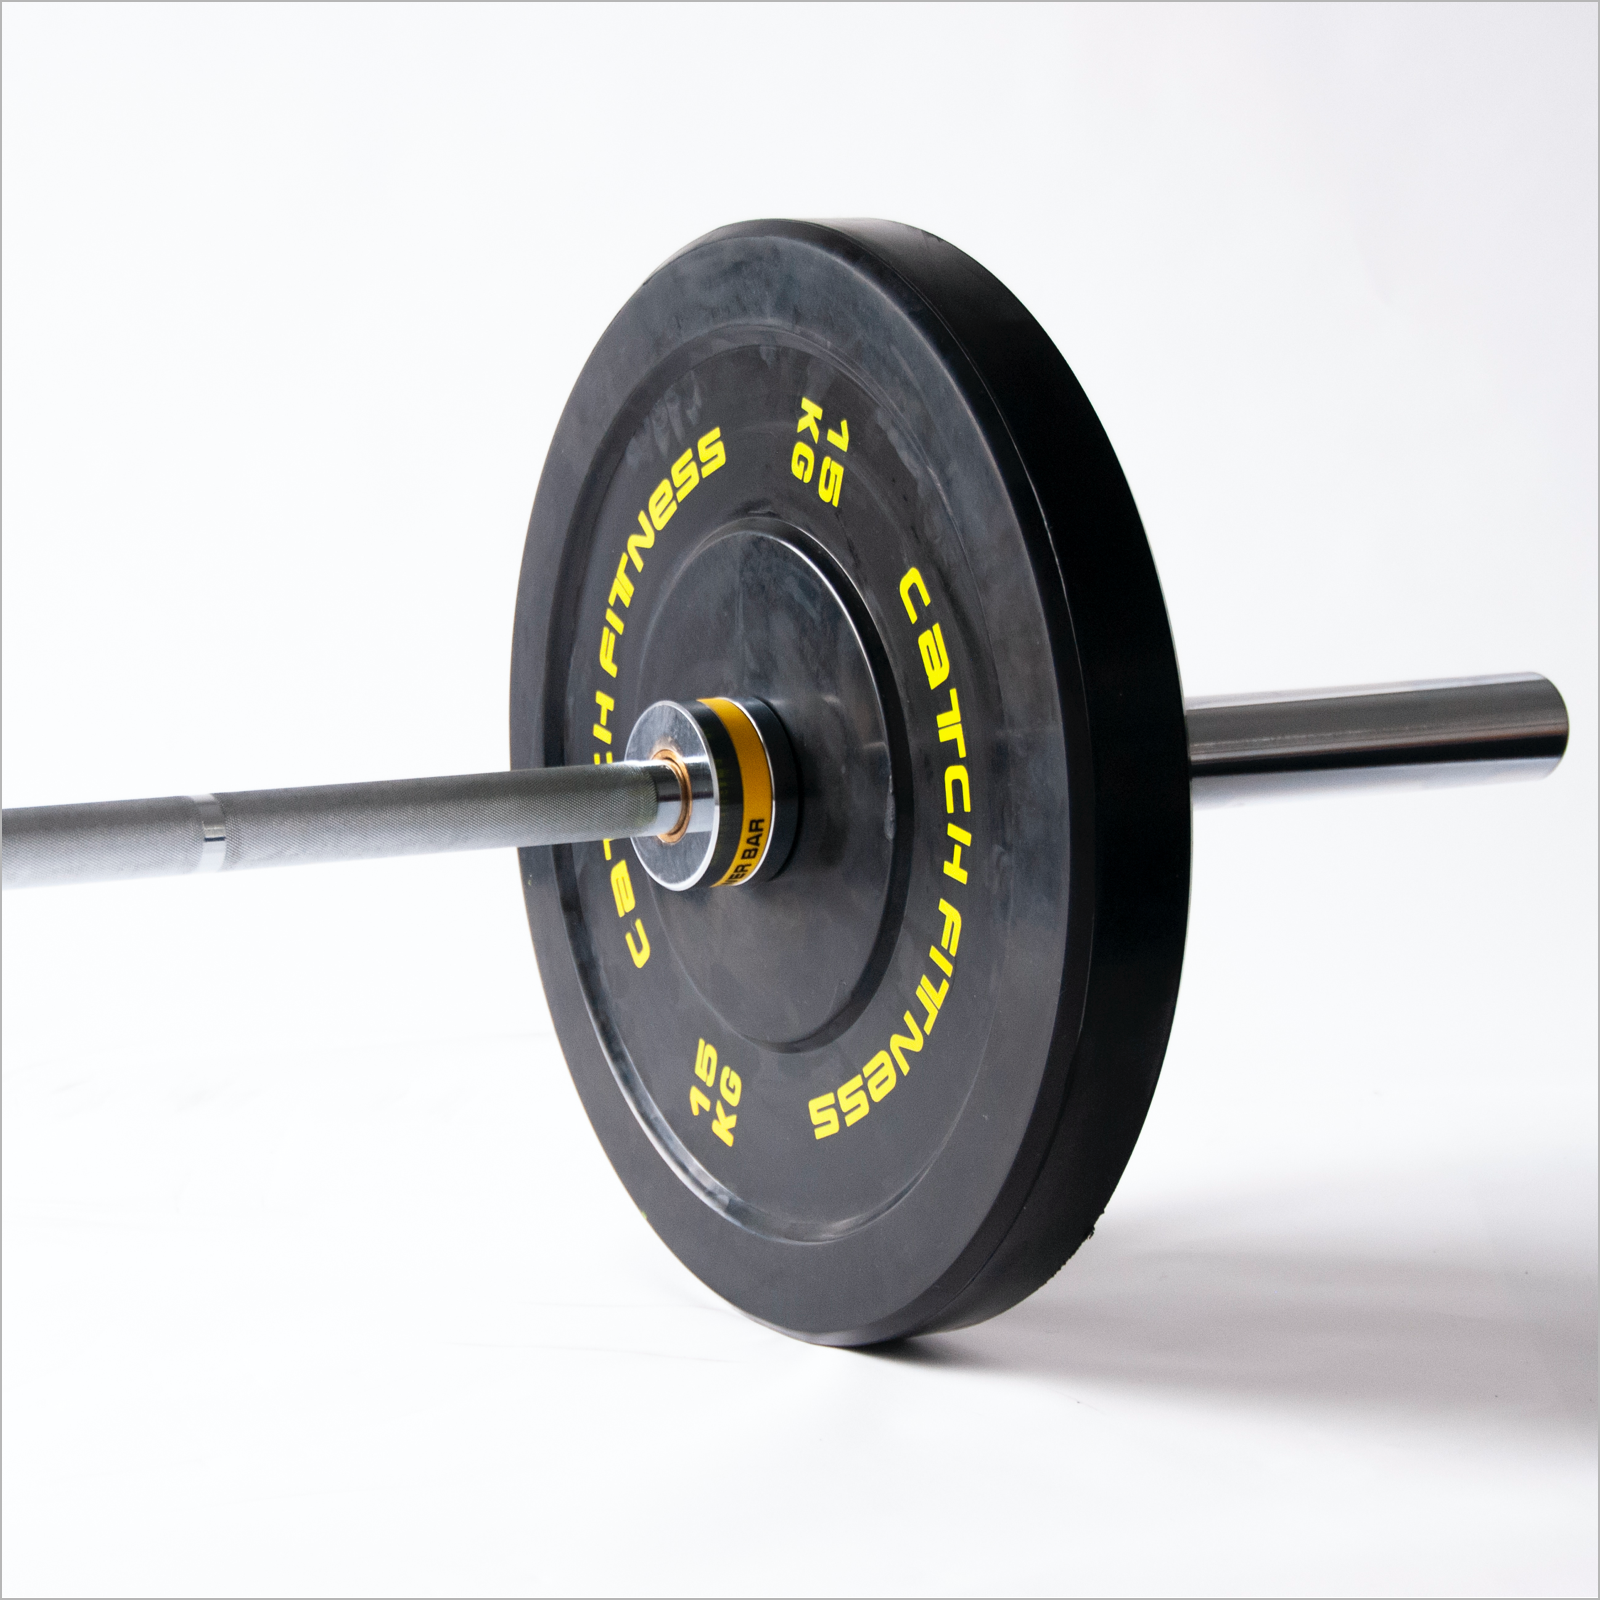 CATCH Olympic Bumper Plate Pairs | In Stock - Bumper Weight Plates -Catch Fitness